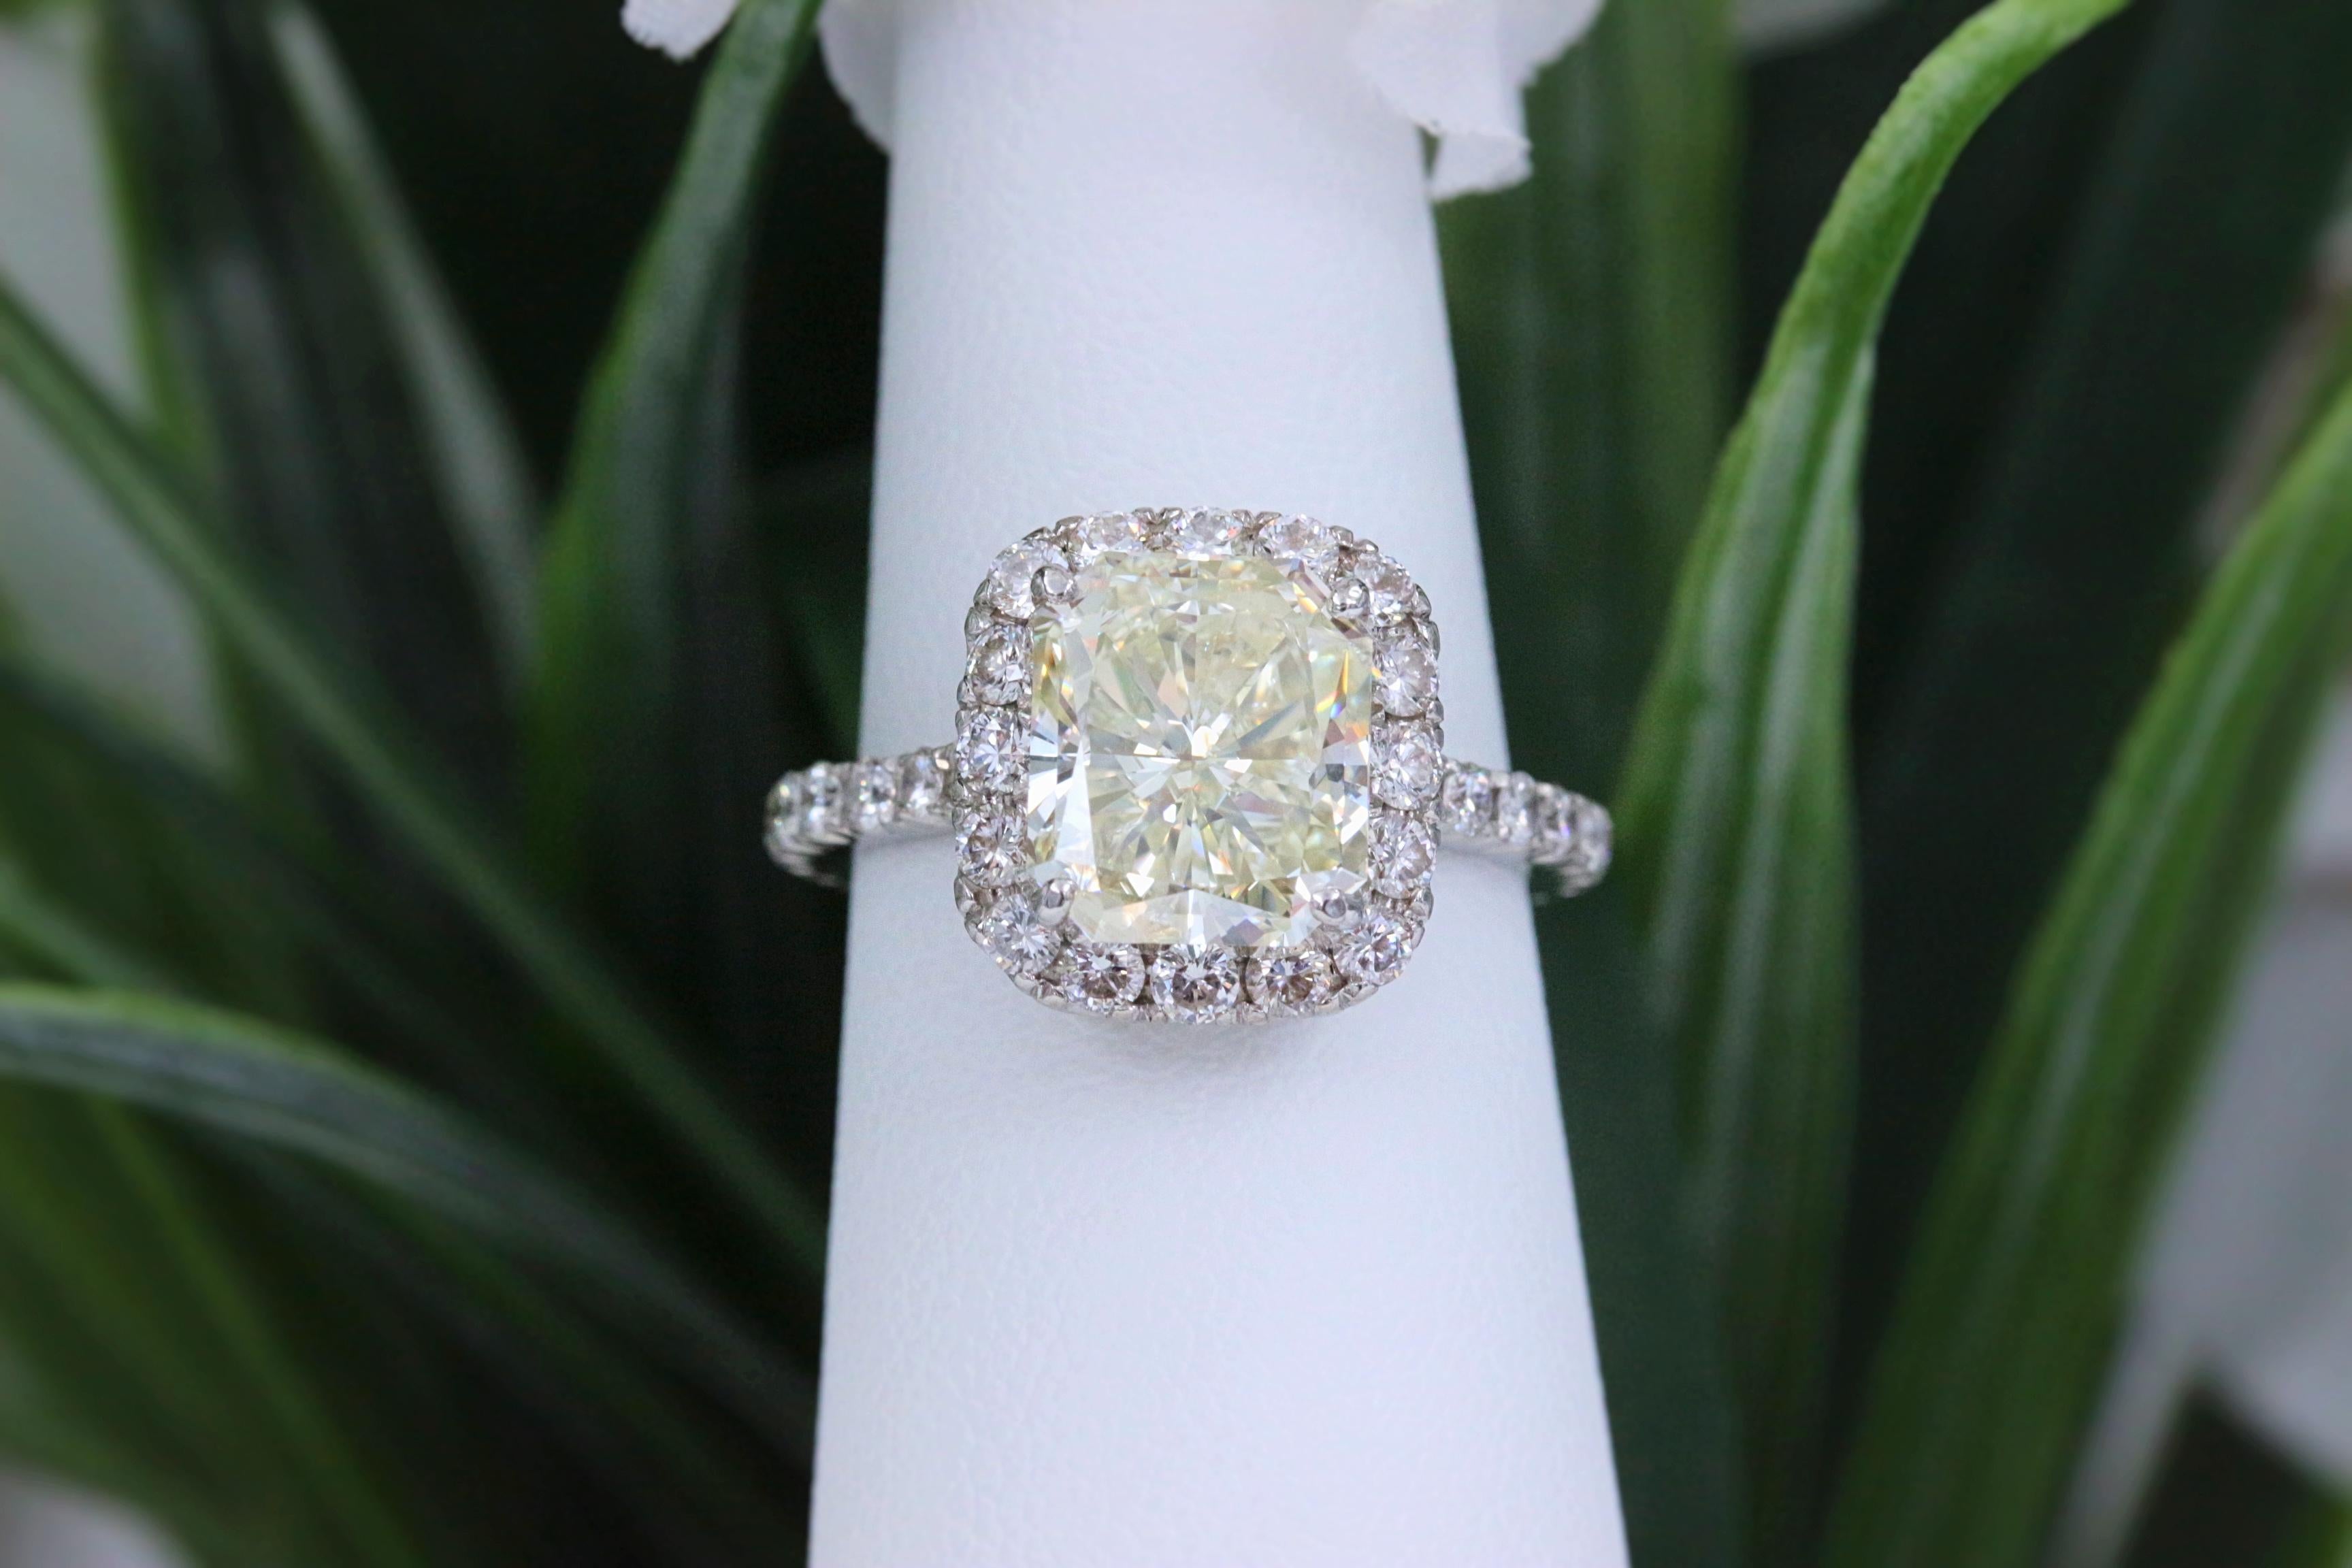 Radiant Diamond Engagement Ring Halo Design 4.61 Carat Set in Platinum In Excellent Condition For Sale In San Diego, CA